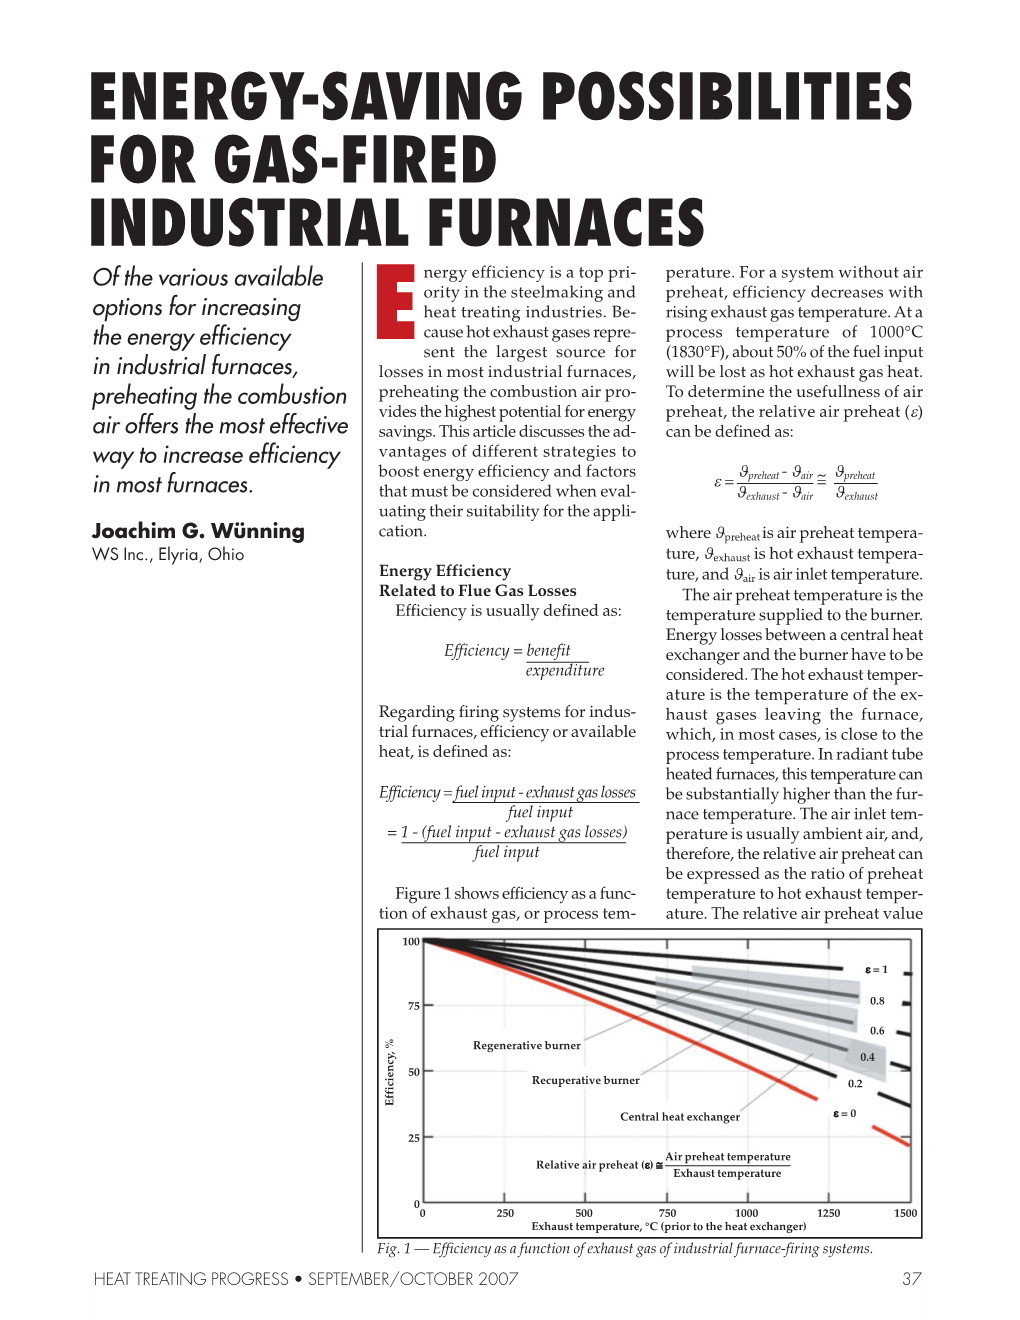 ENERGY-SAVING POSSIBILITIES for GAS-FIRED INDUSTRIAL FURNACES of the Various Available Nergy Efficiency Is a Top Pri- Perature